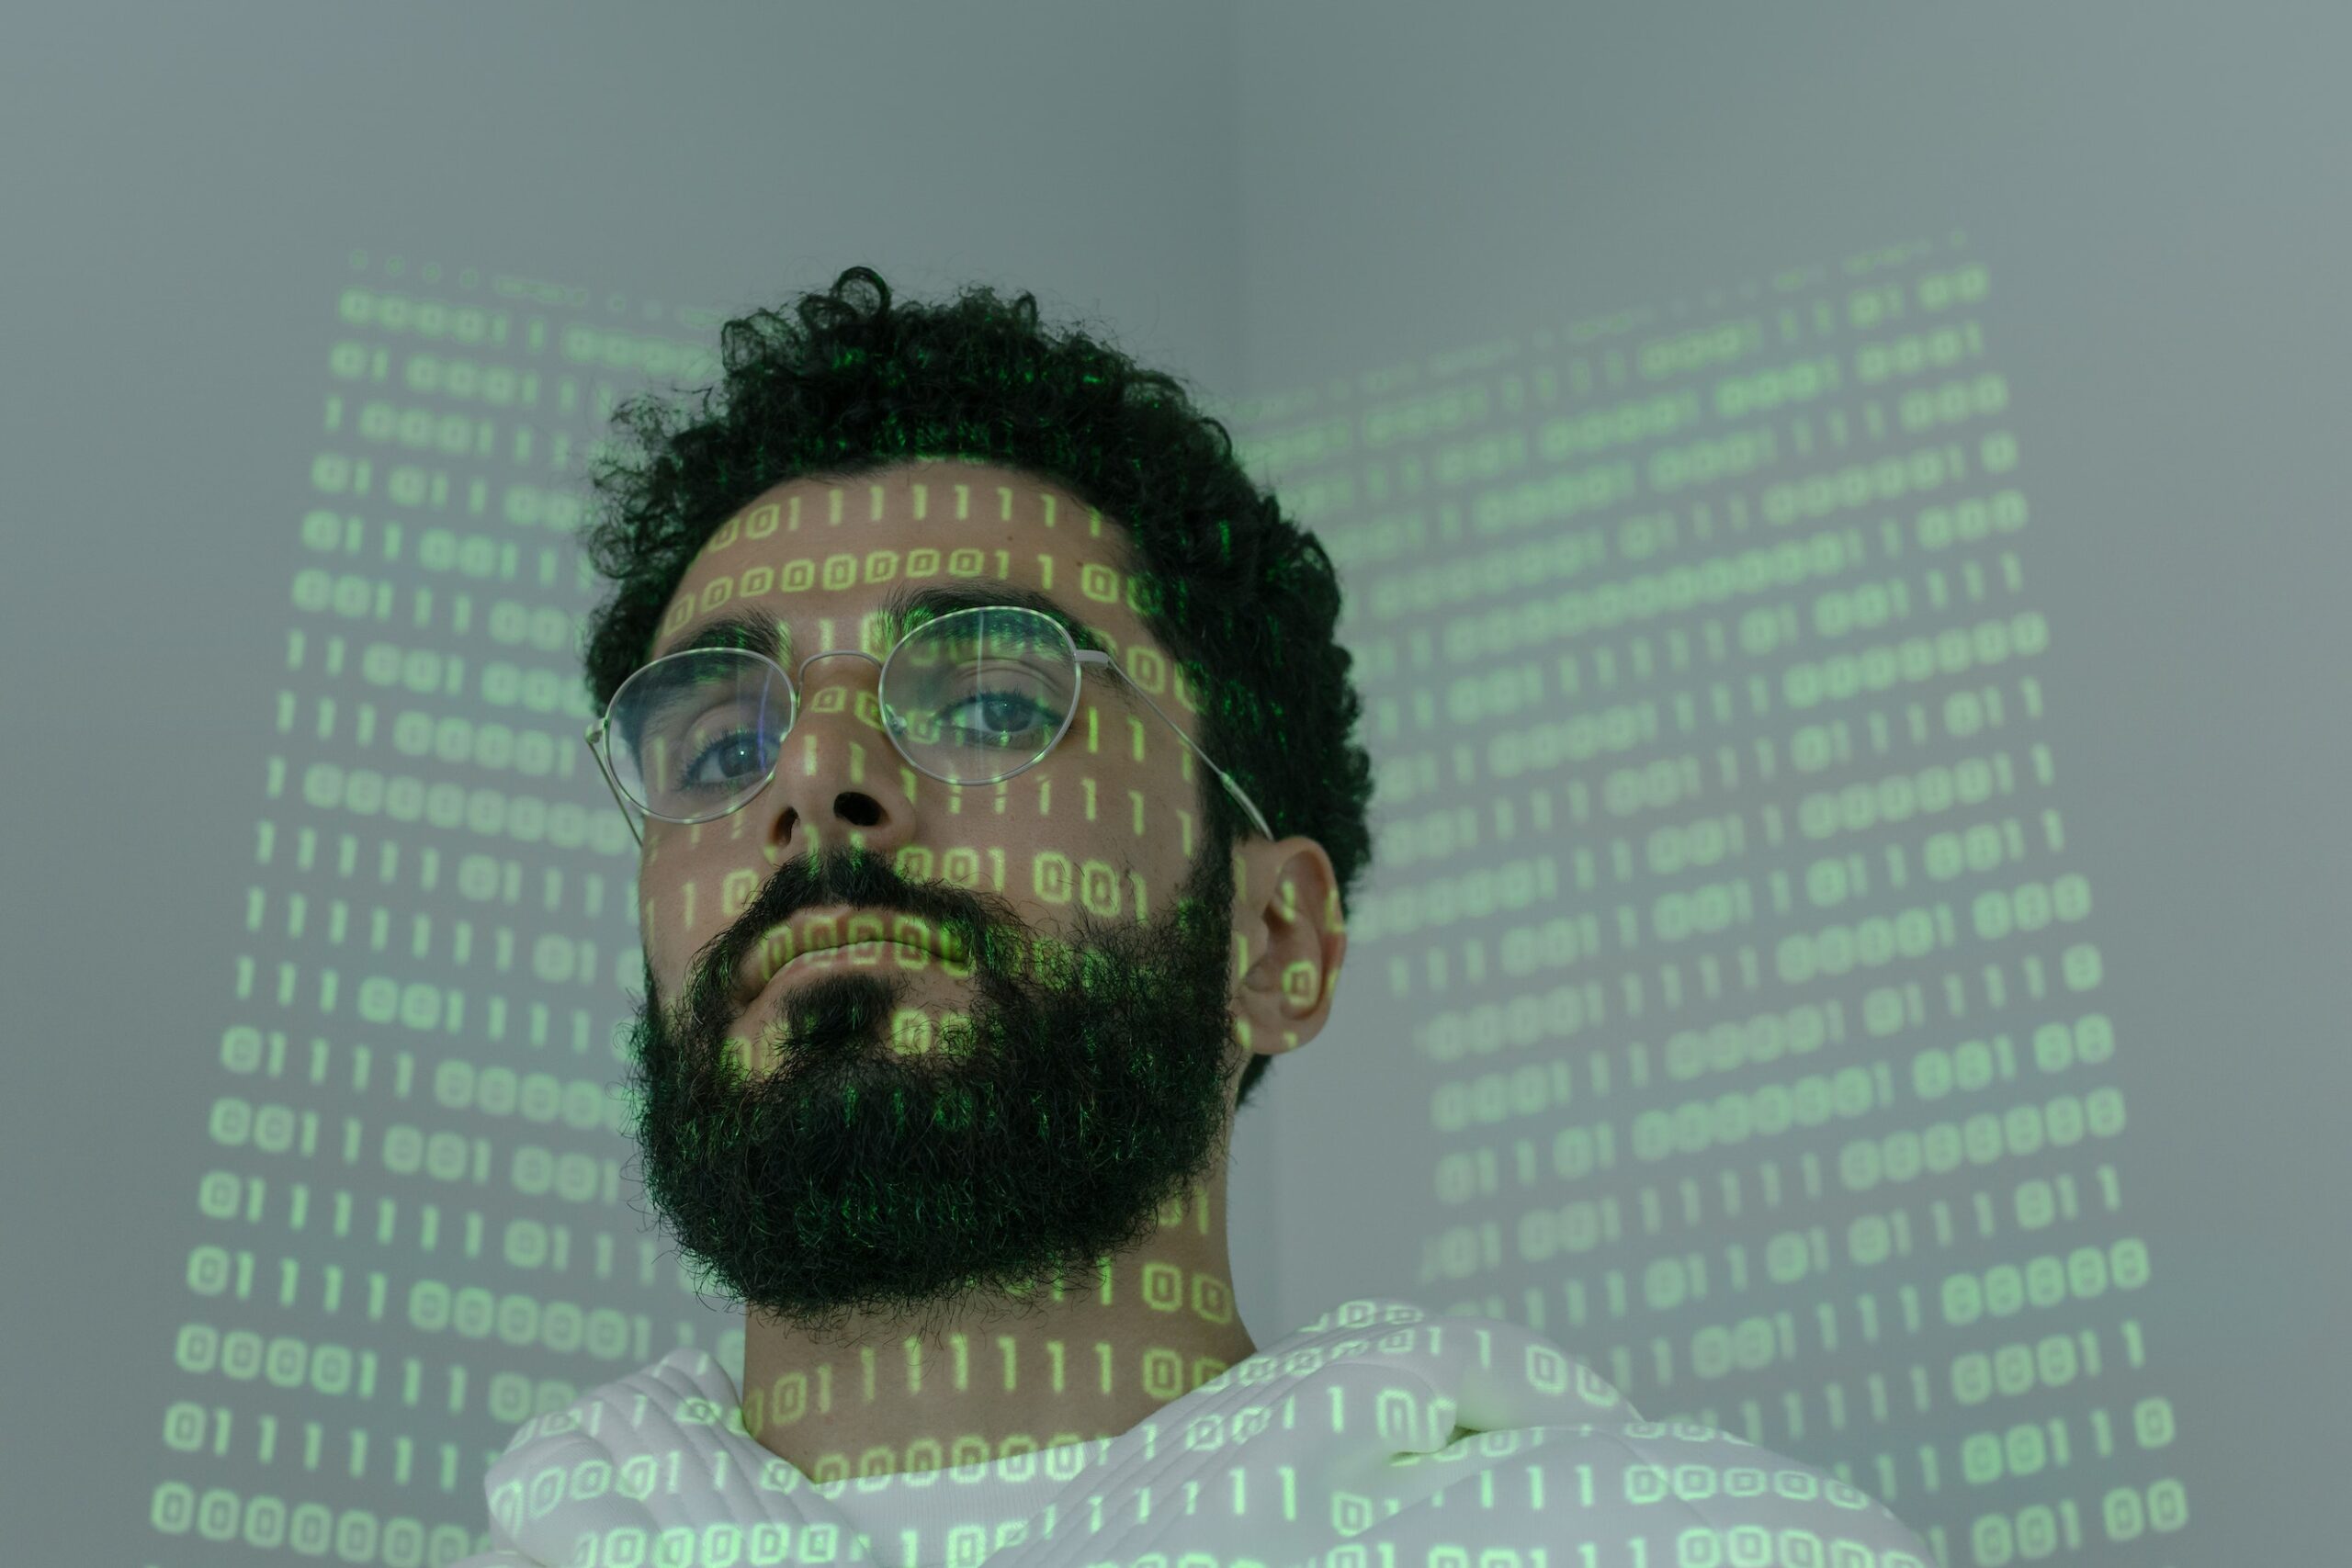 bearded, dark haired man in front of a screen with computer code, part of the code is projected on his face and head